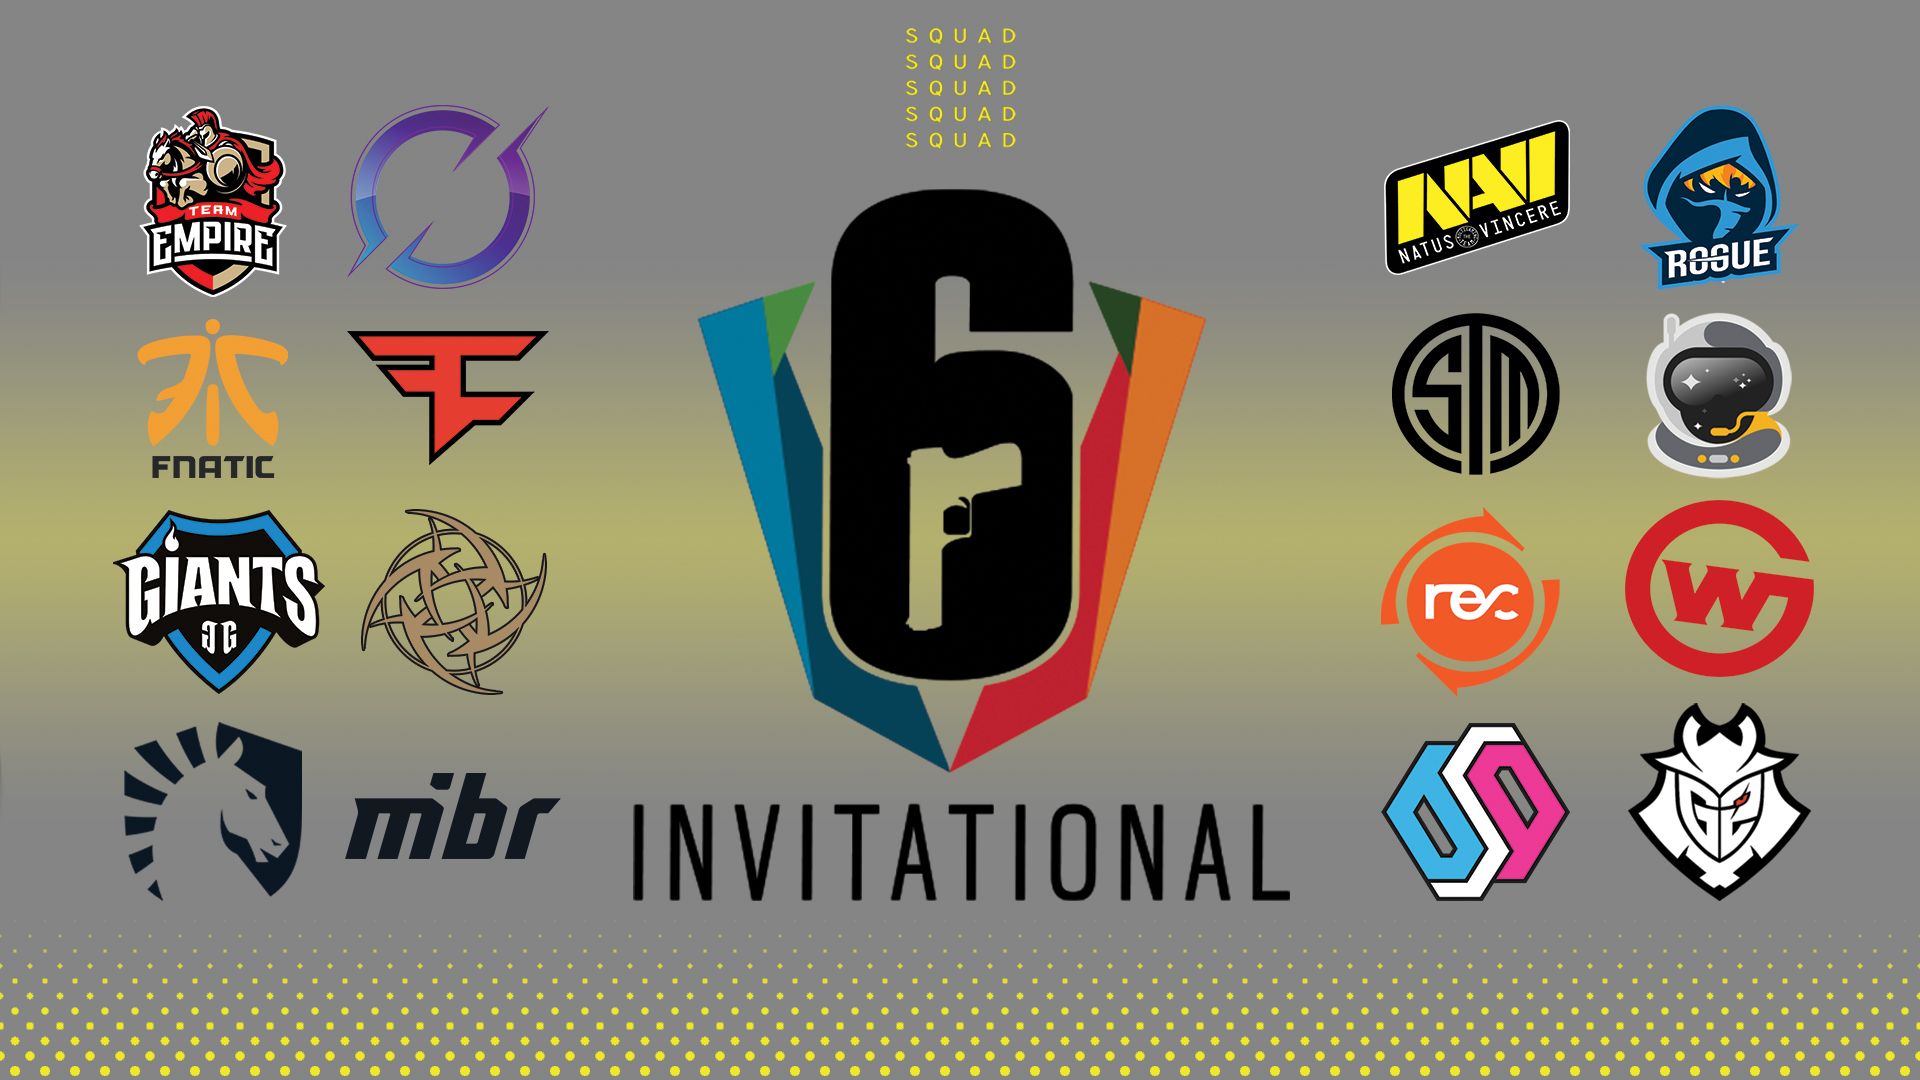 Rainbow Six Siege Invitational group stage preview and predictions